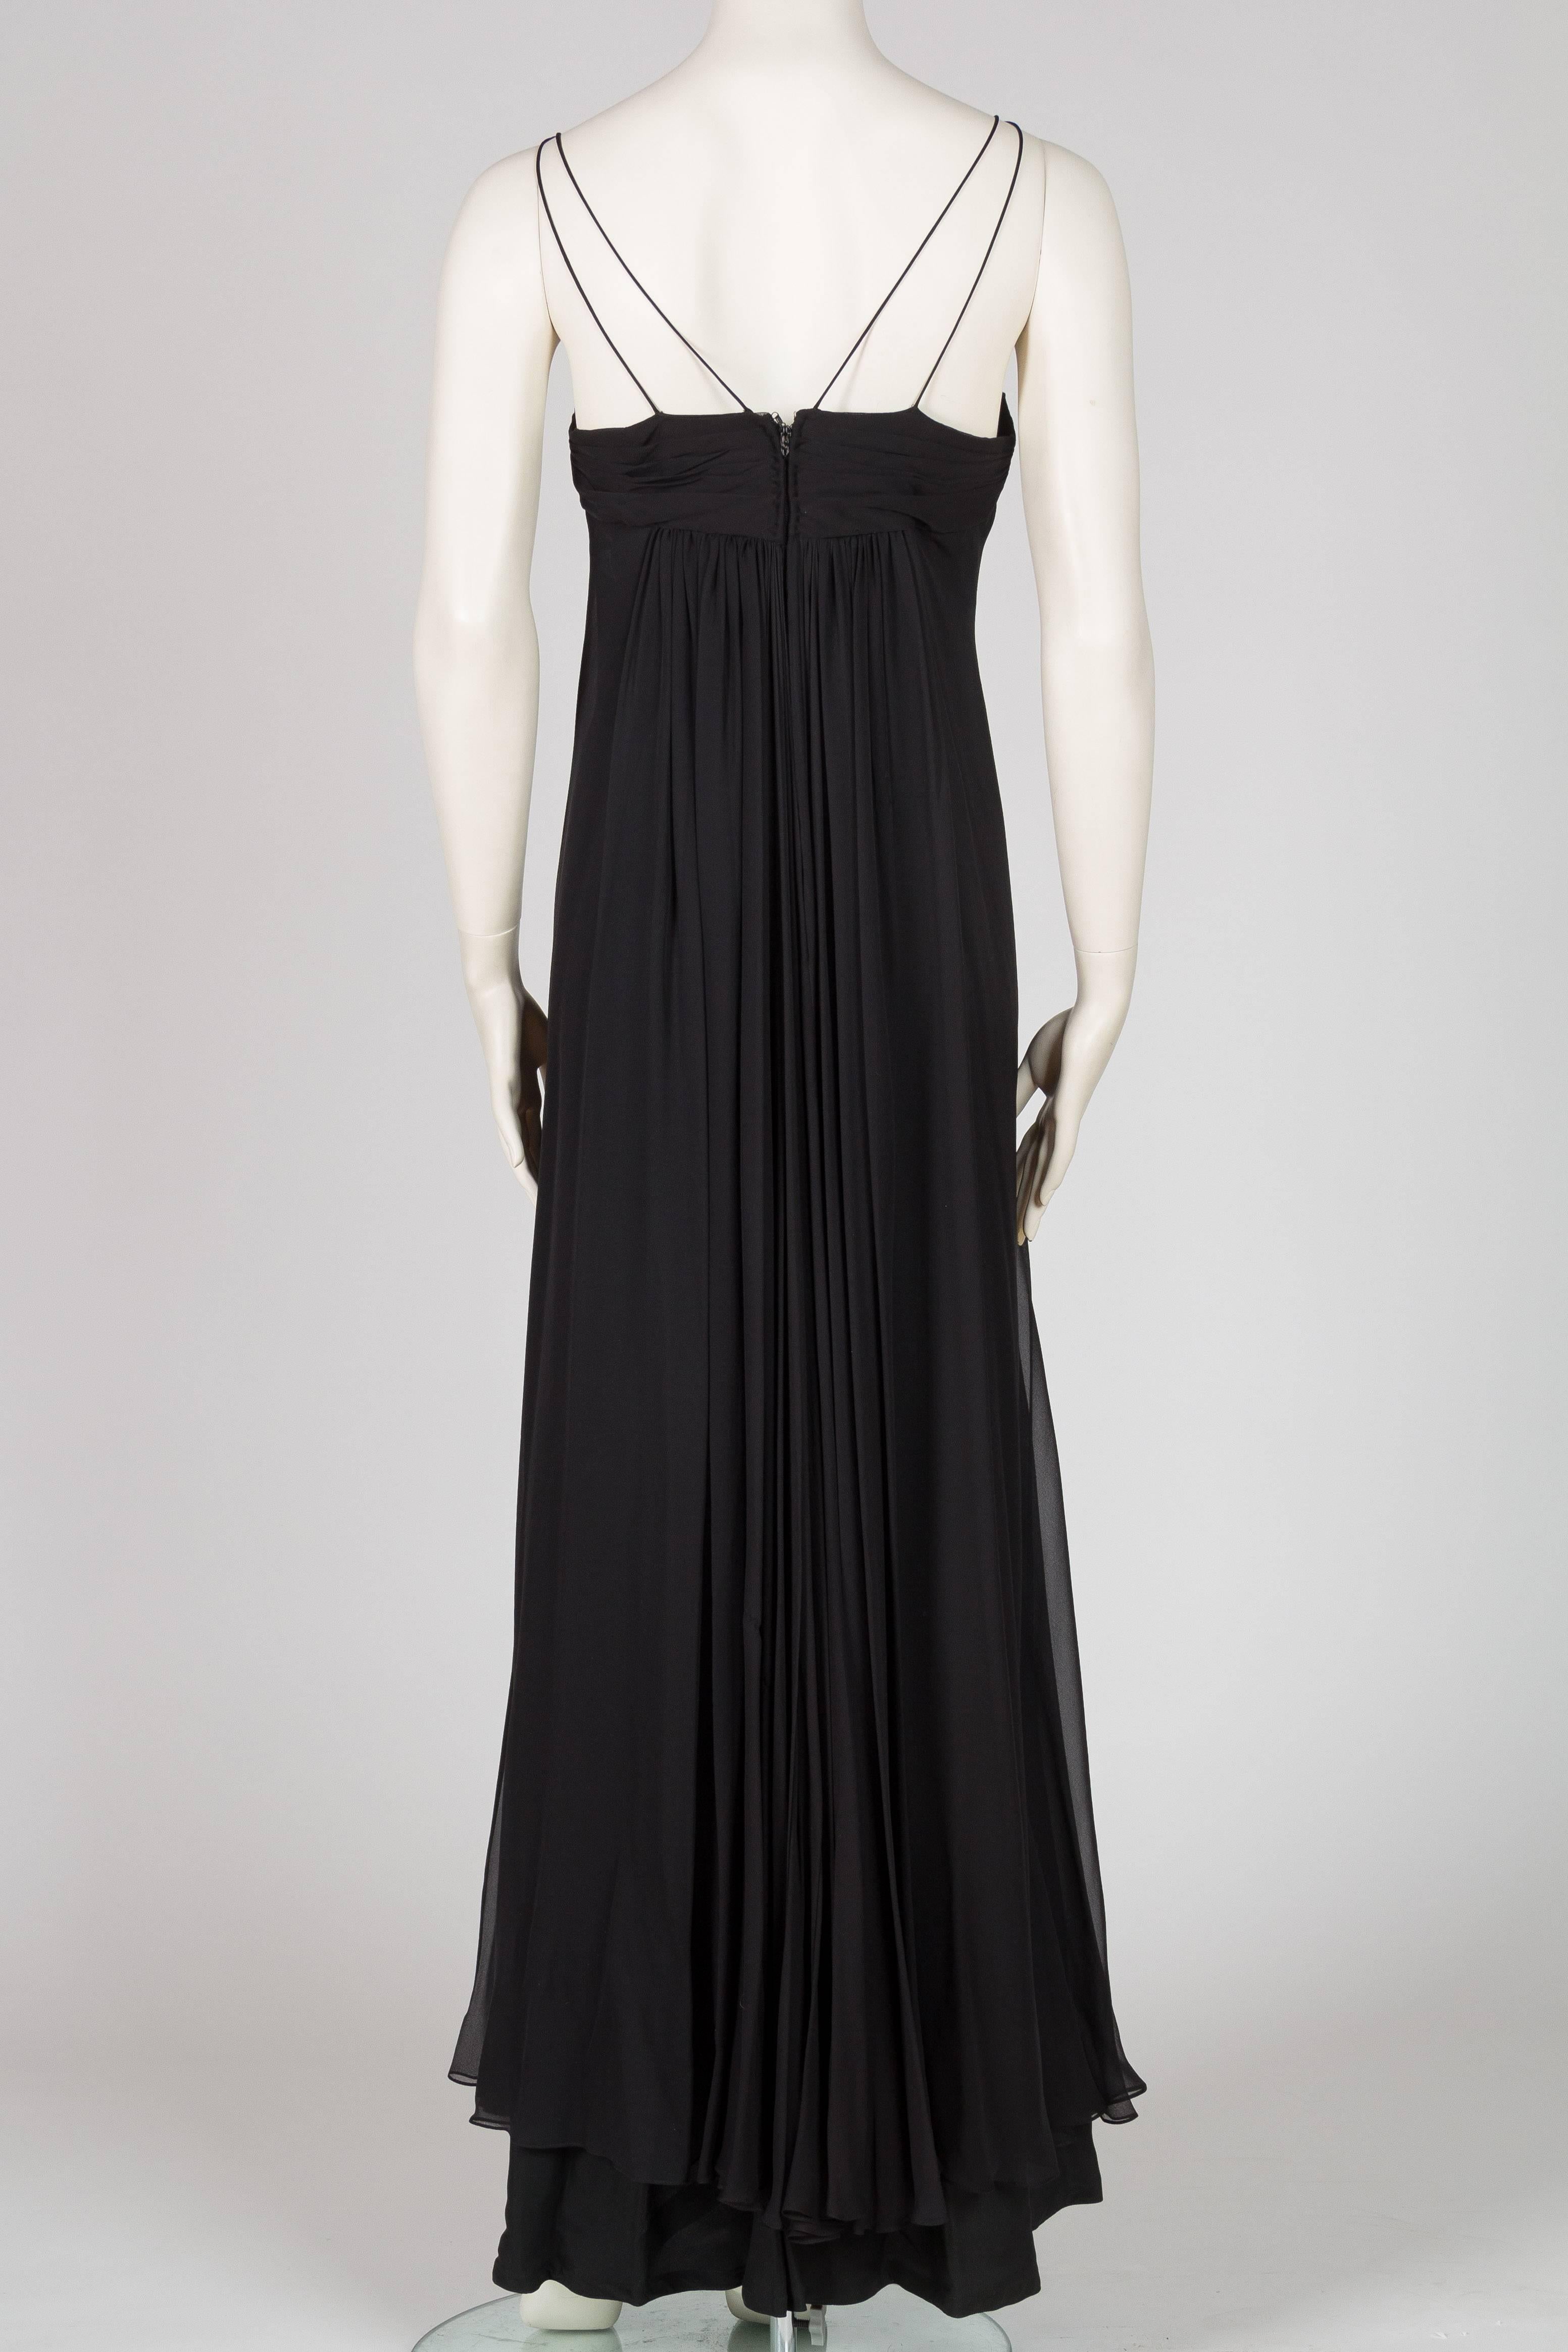 Women's 1970s Alfred Bosand Beaded Silk Chiffon Gown with Cape